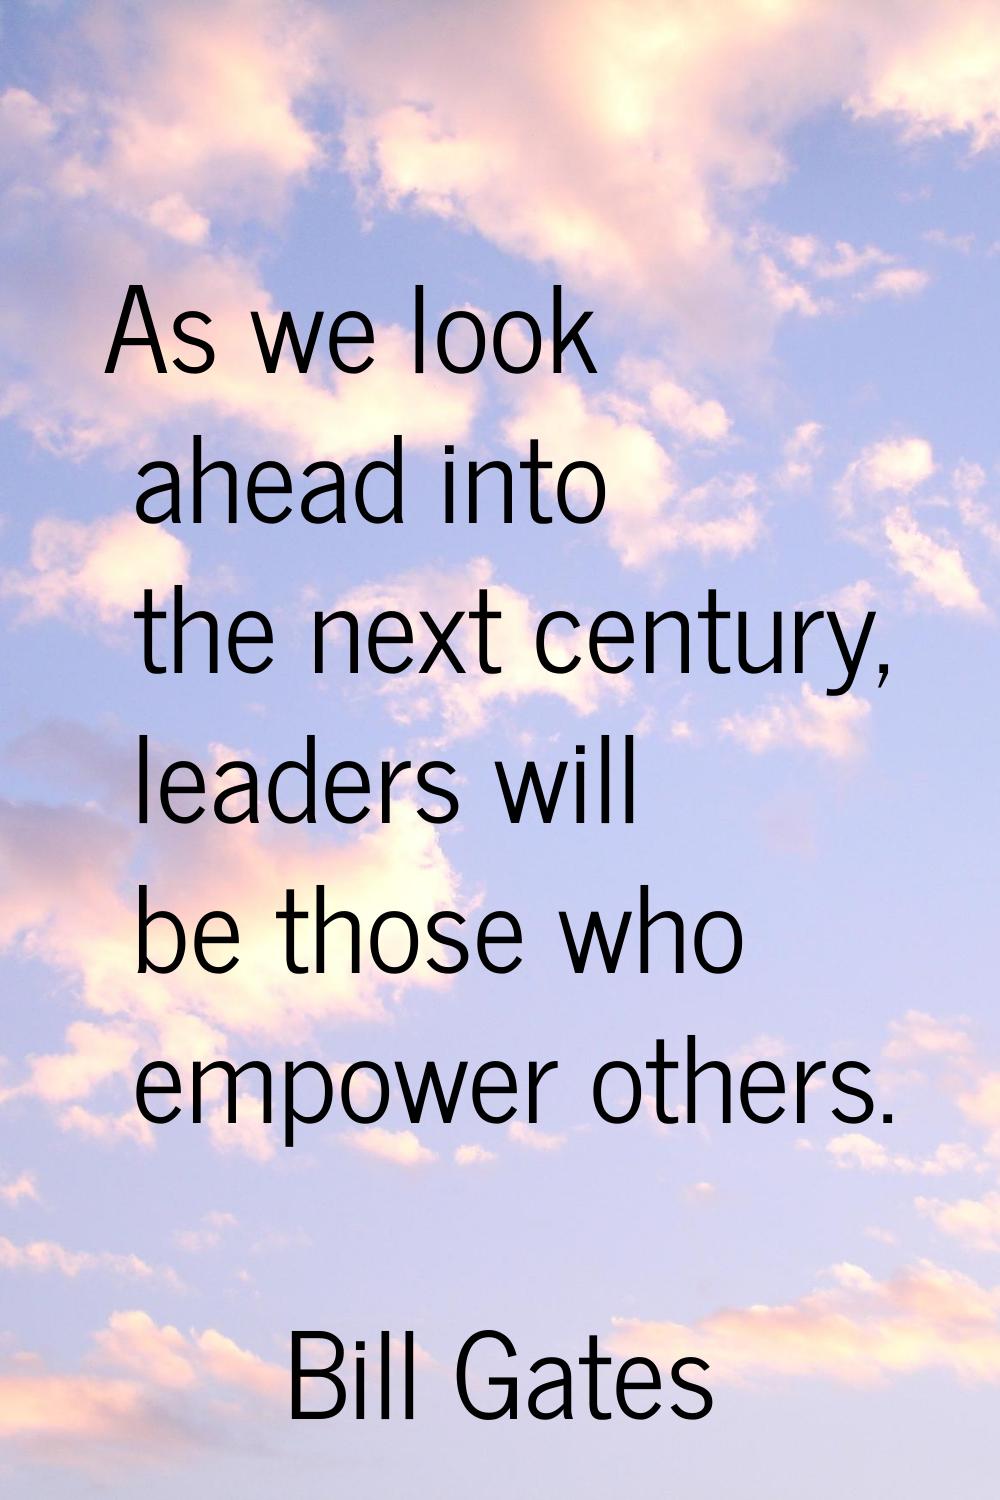 As we look ahead into the next century, leaders will be those who empower others.